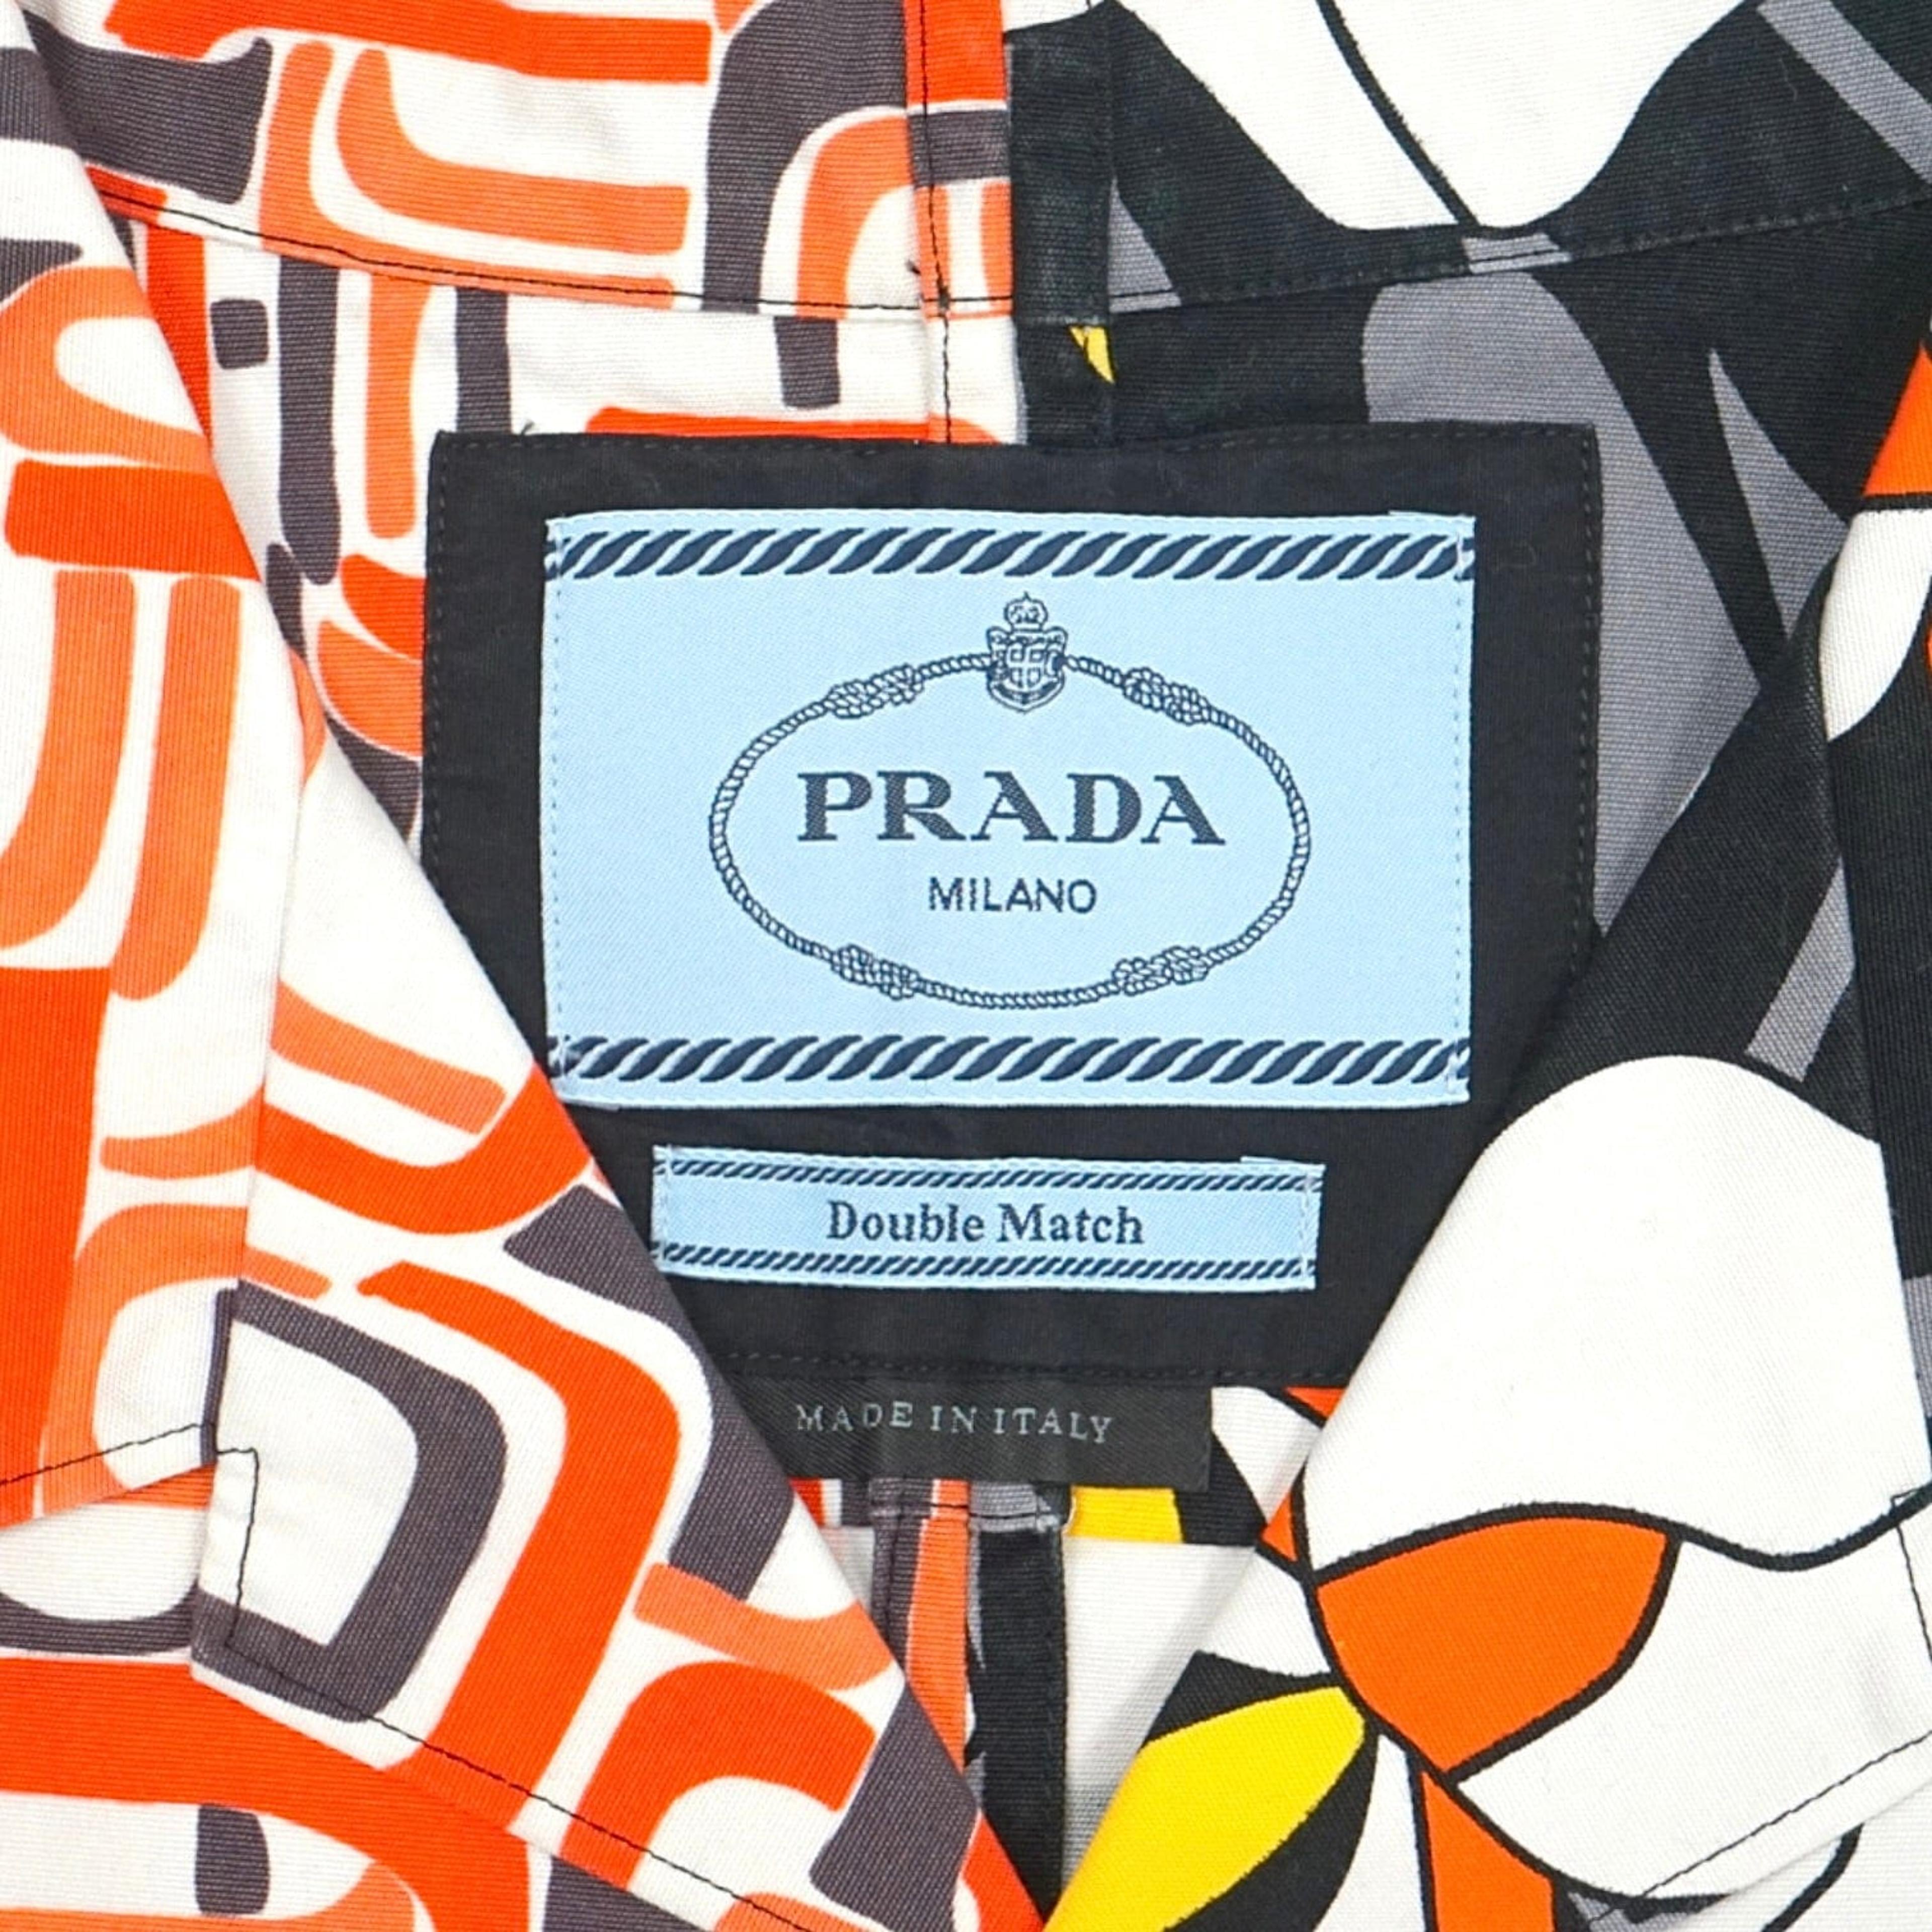 Alternate View 5 of Prada Double Match Button Up Orange Grey Flowers Pre-Owned